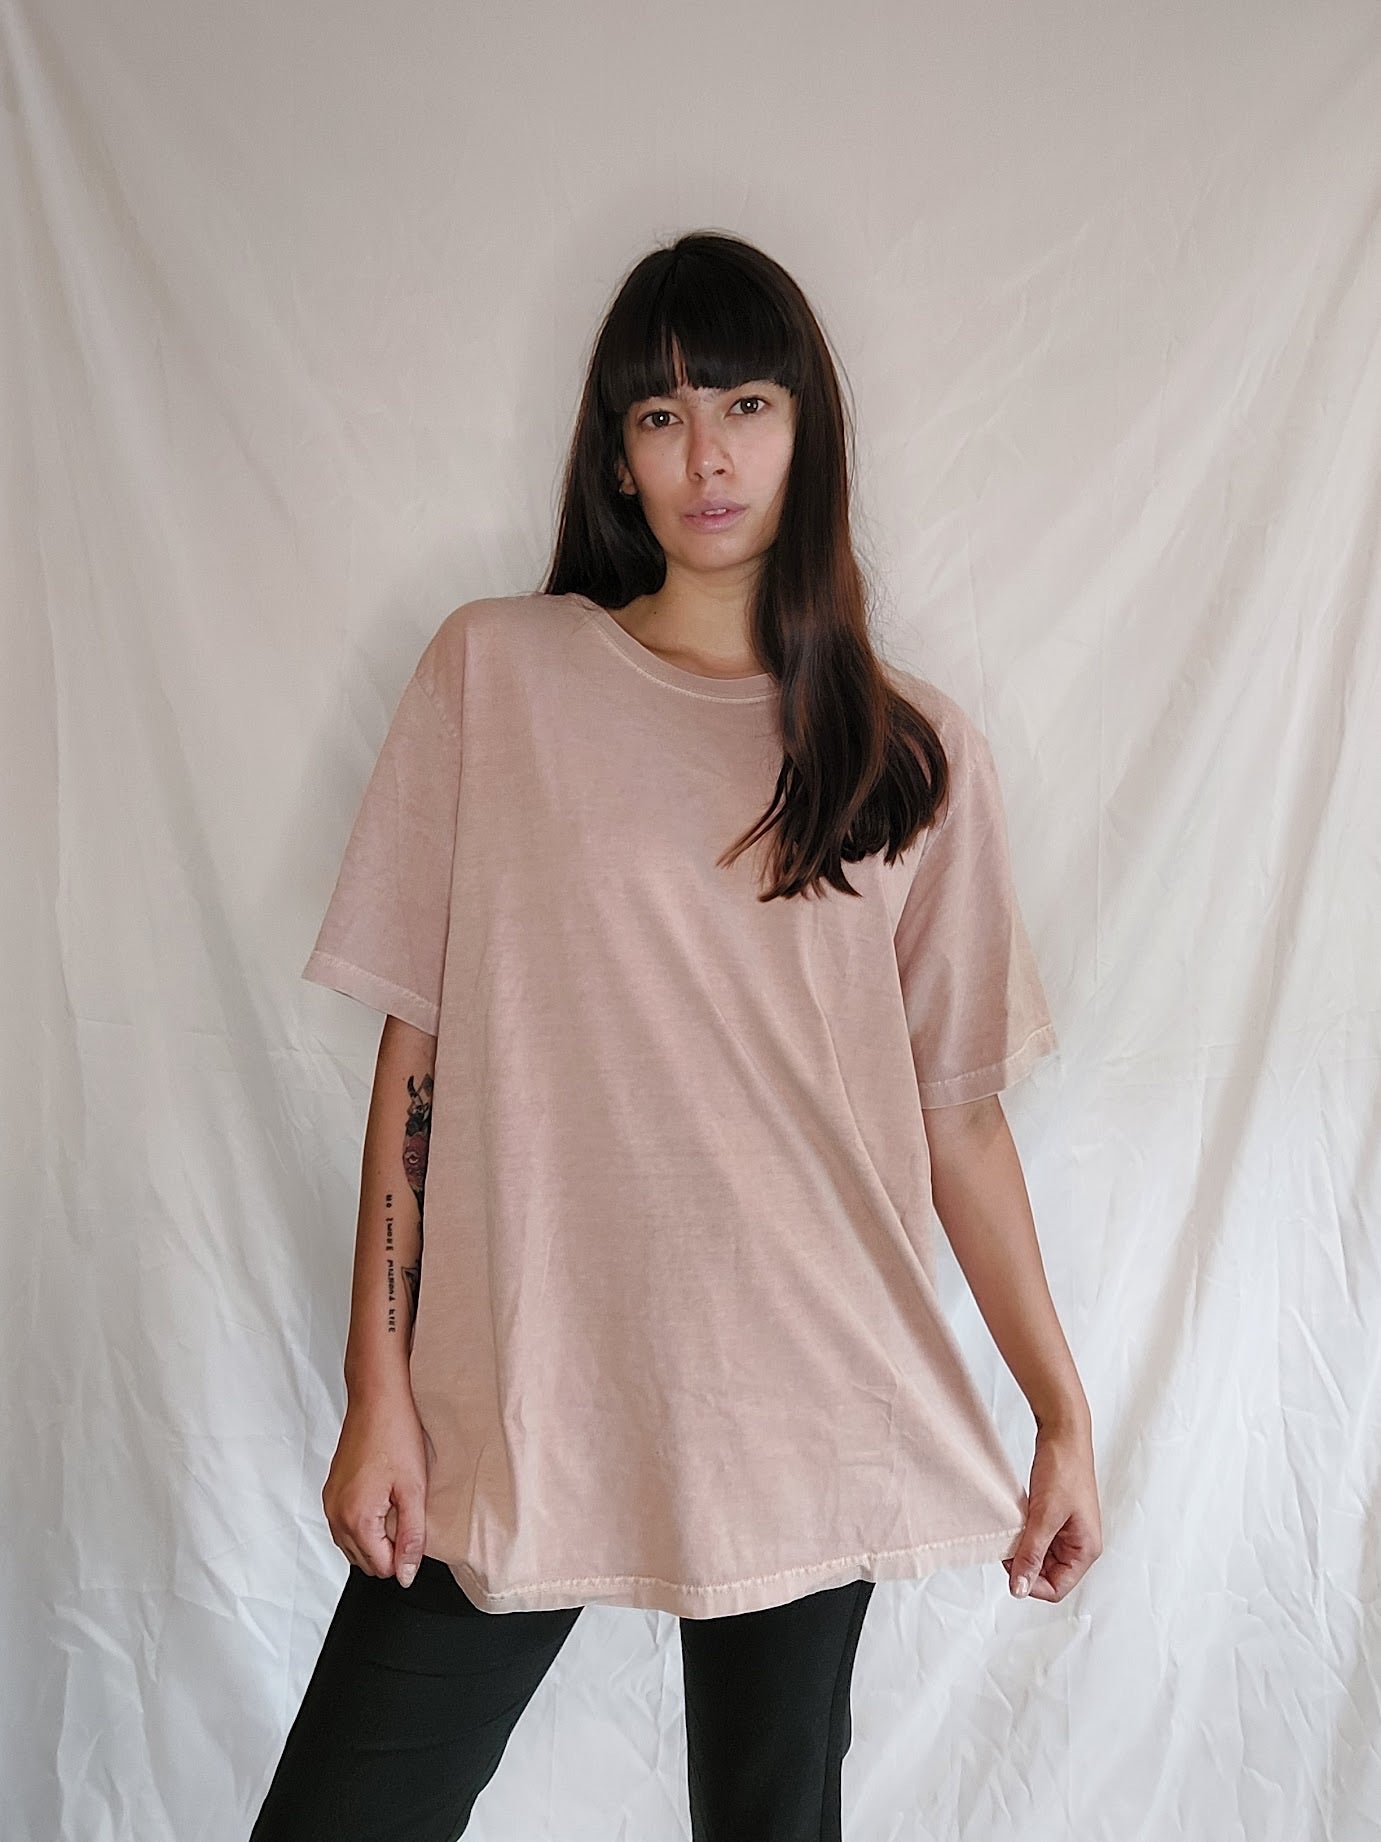 WDTS Heavyweight T-SHIRT GARMENT DYED DUSTY ROSE